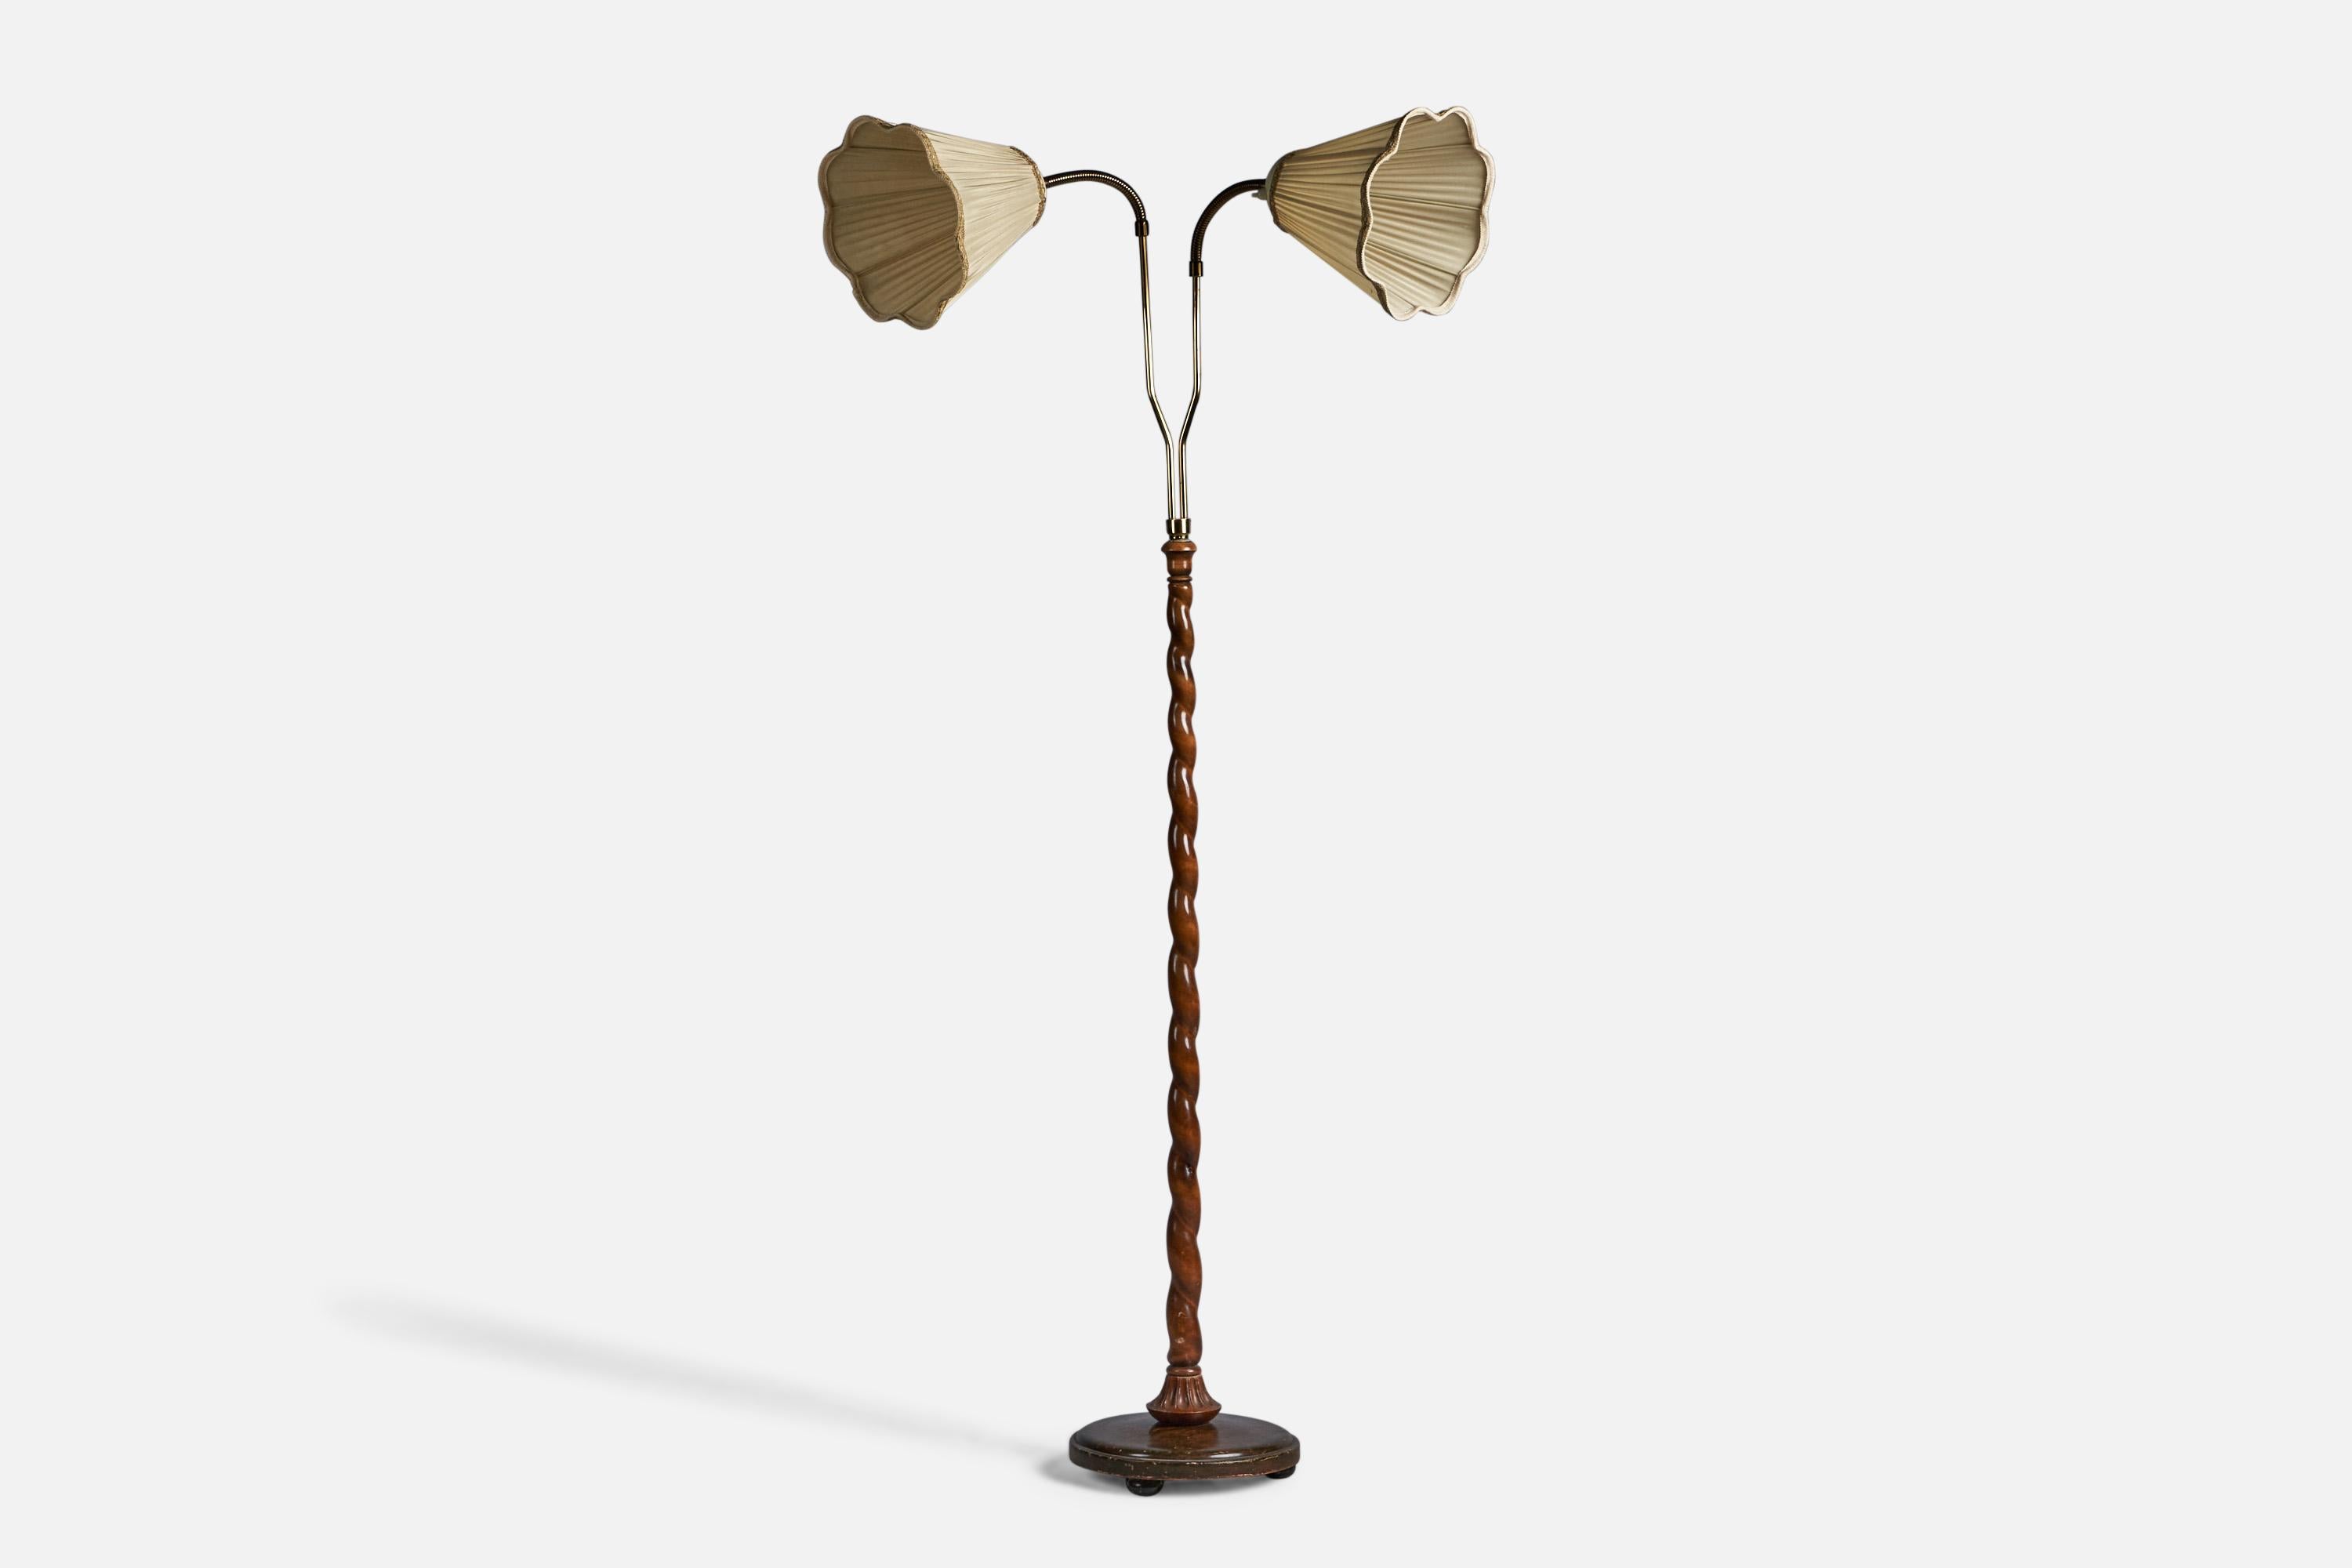 A two-armed carved dark-stained wood, brass and fabric floor lamp, designed and produced in Sweden, c. 1930s.

Overall Dimensions (inches): 64.75